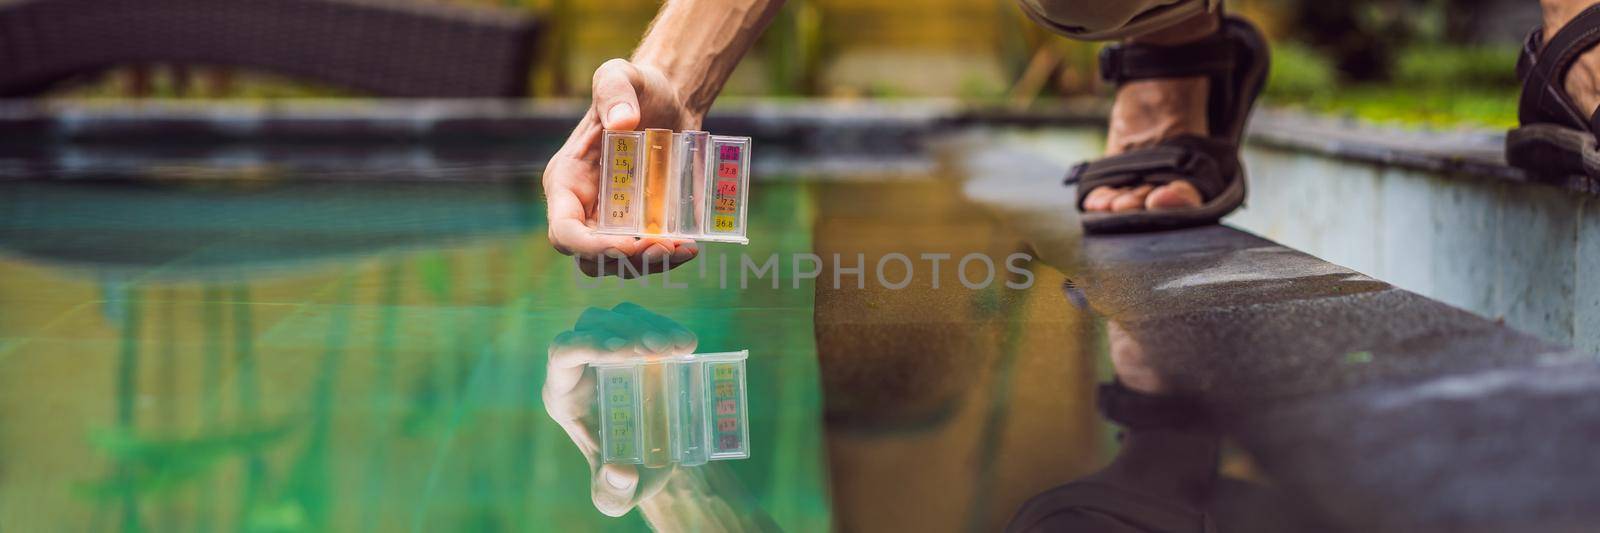 Pool worker checks the pool for safety. Measurement of chlorine and PH of a pool BANNER, LONG FORMAT by galitskaya